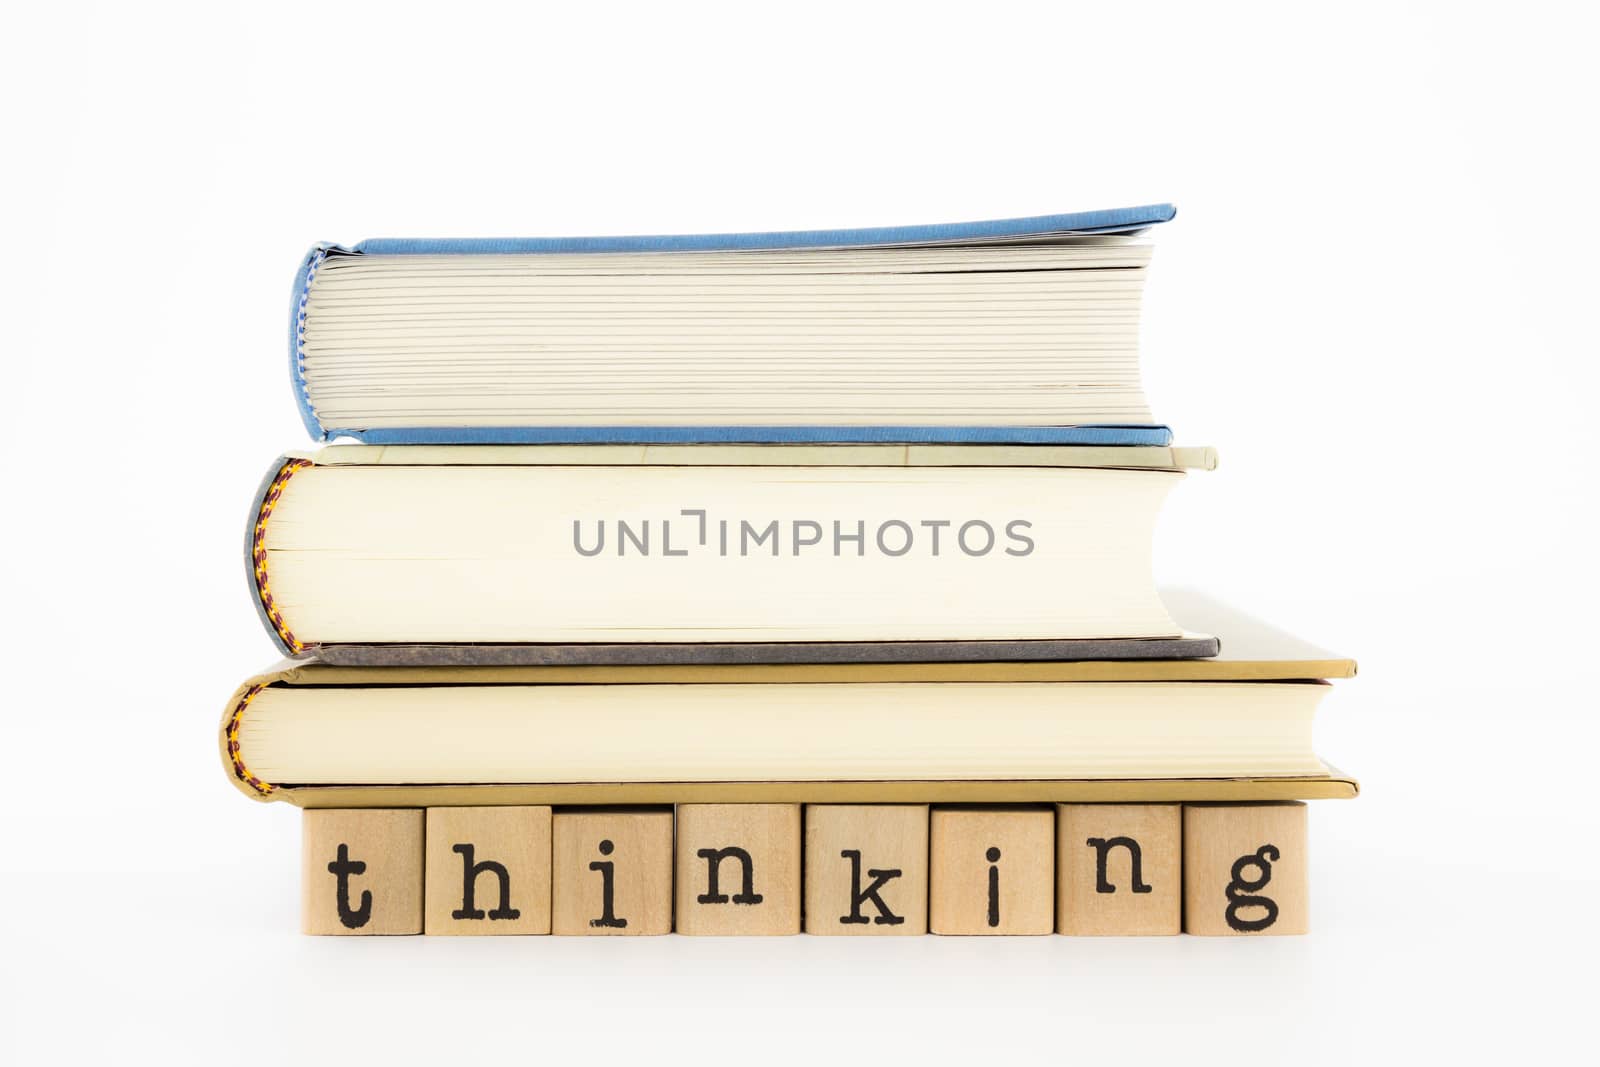 thinking wording and books by vinnstock